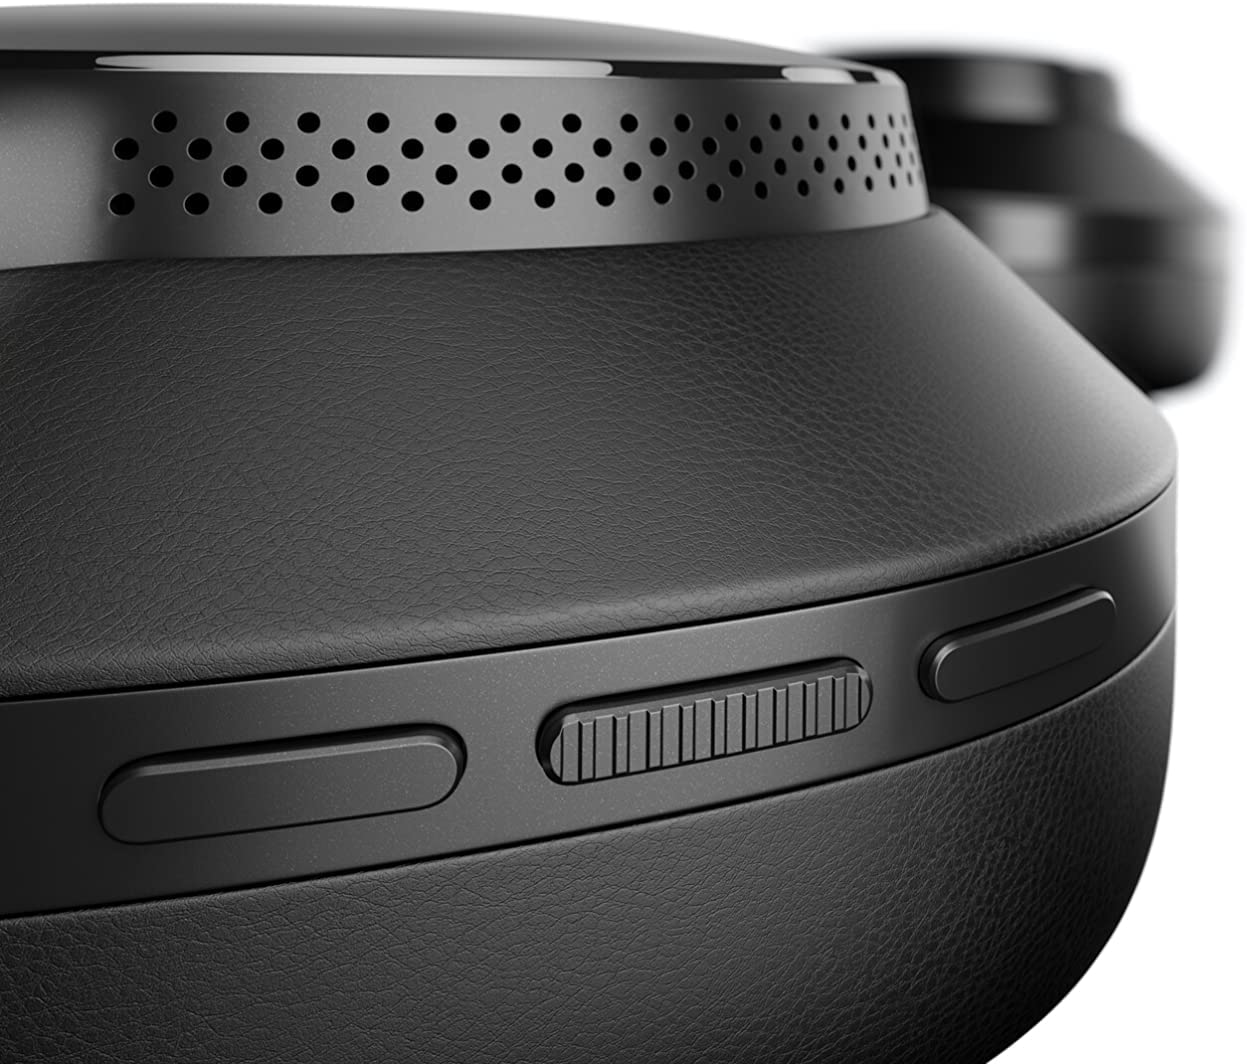 Bowers & Wilkins PX8 ANC Wireless Over-Ear Headphones - Pifferia Global